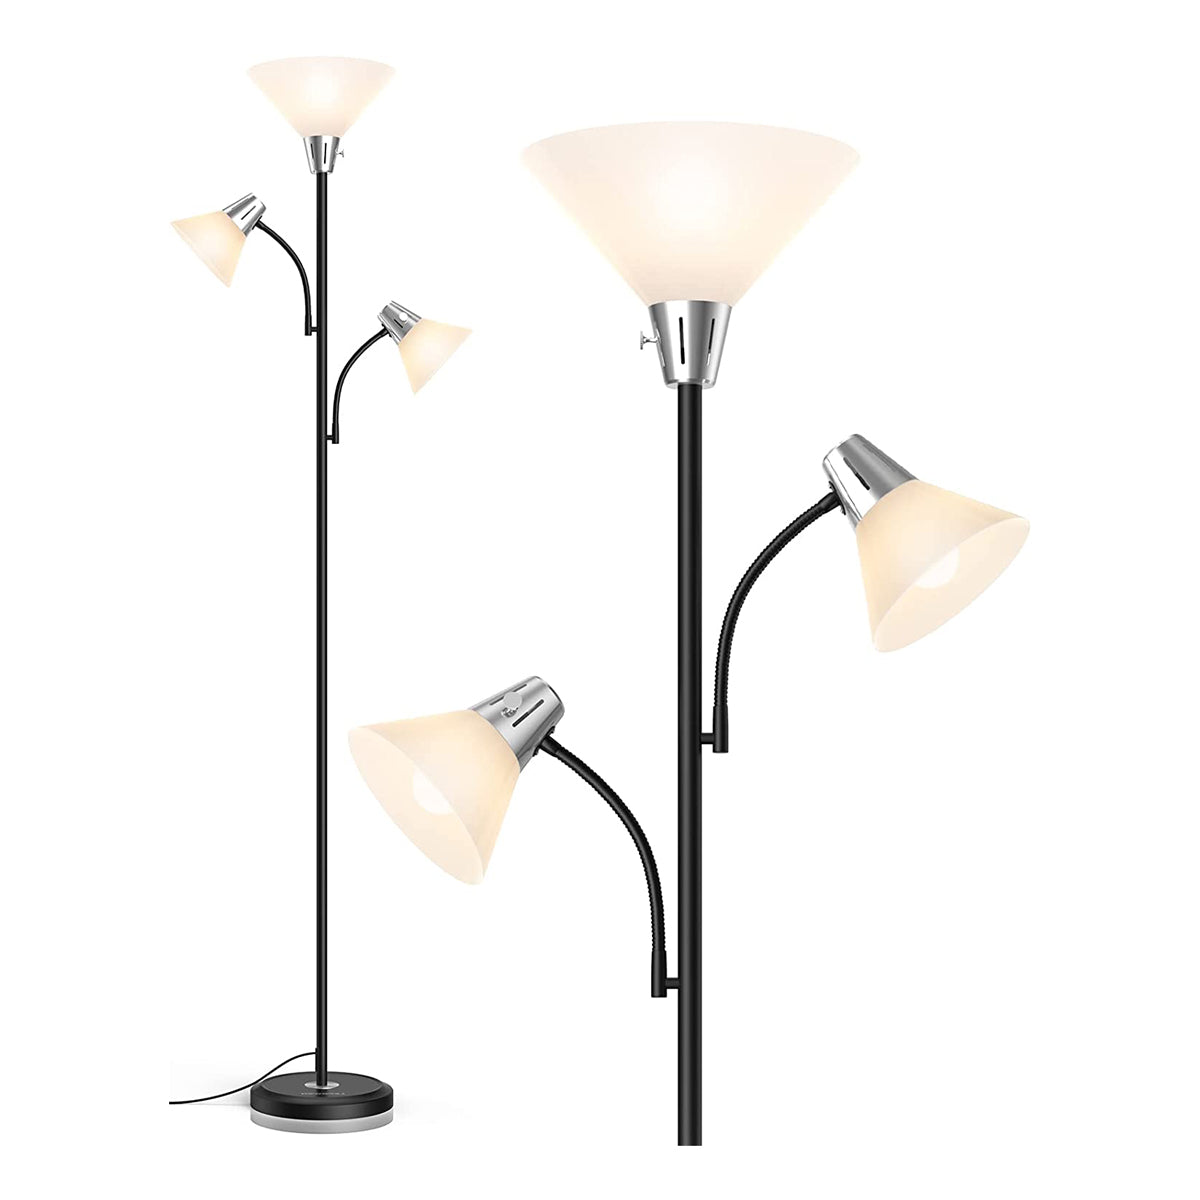 https://cdn.shopify.com/s/files/1/0107/2847/2676/products/lepower-tree-torchiere-floor-lamp-with-2-side-lights.jpg?v=1686031922&width=1200